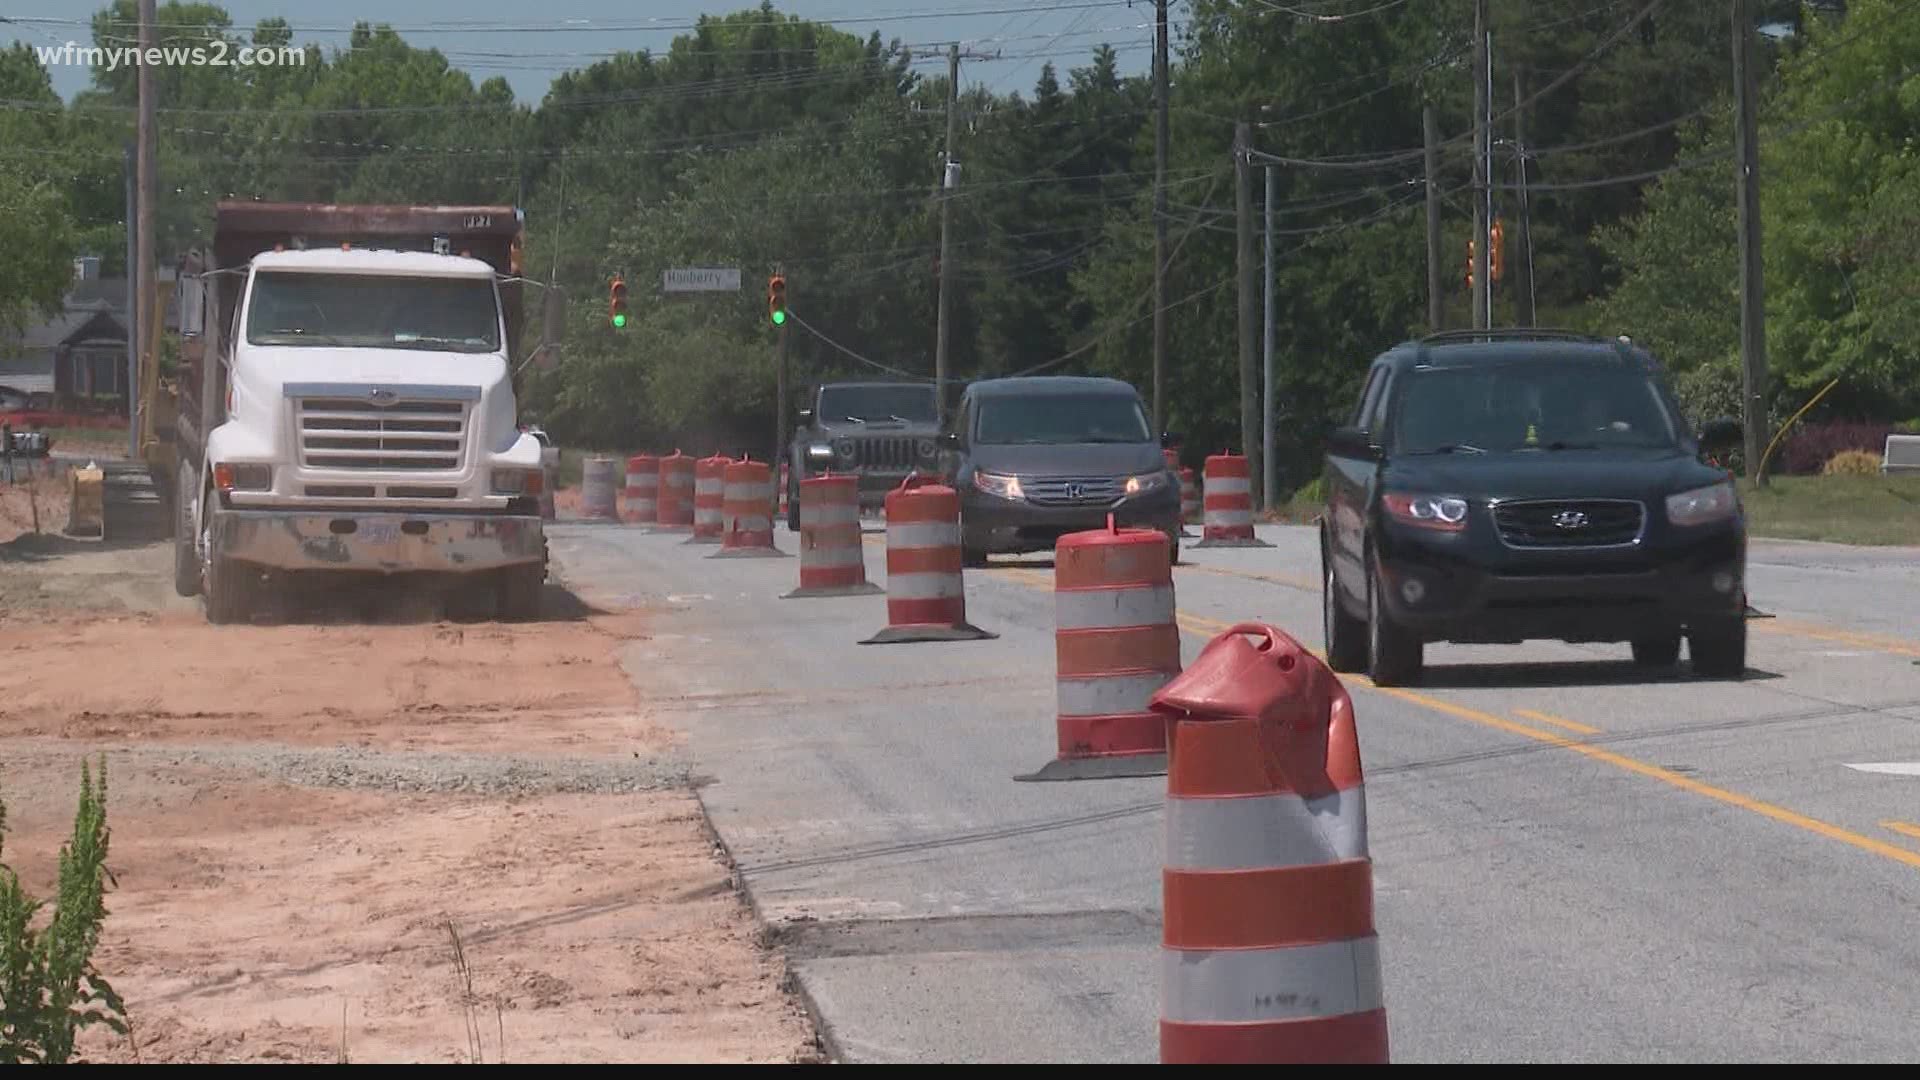 Orange barrels line the streets of some of Greensboro’s busier intersections, but when will the construction be done?